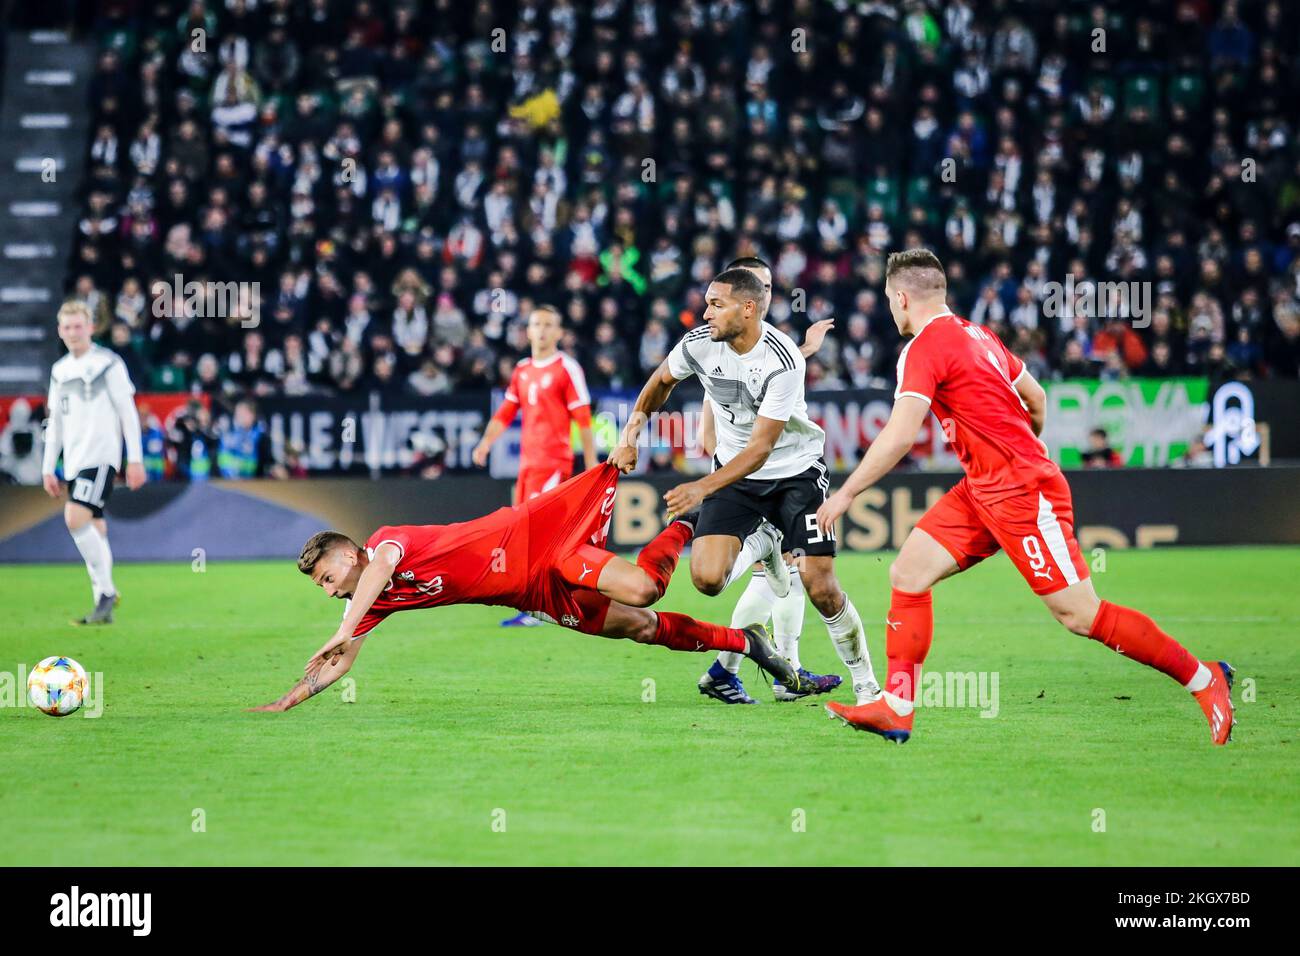 Wolfsburg, Germany, March 20, 2019: footballers Jonathan Tah (GER) and Sergej Milinkovic (SRB) in action during the international soccer game Stock Photo